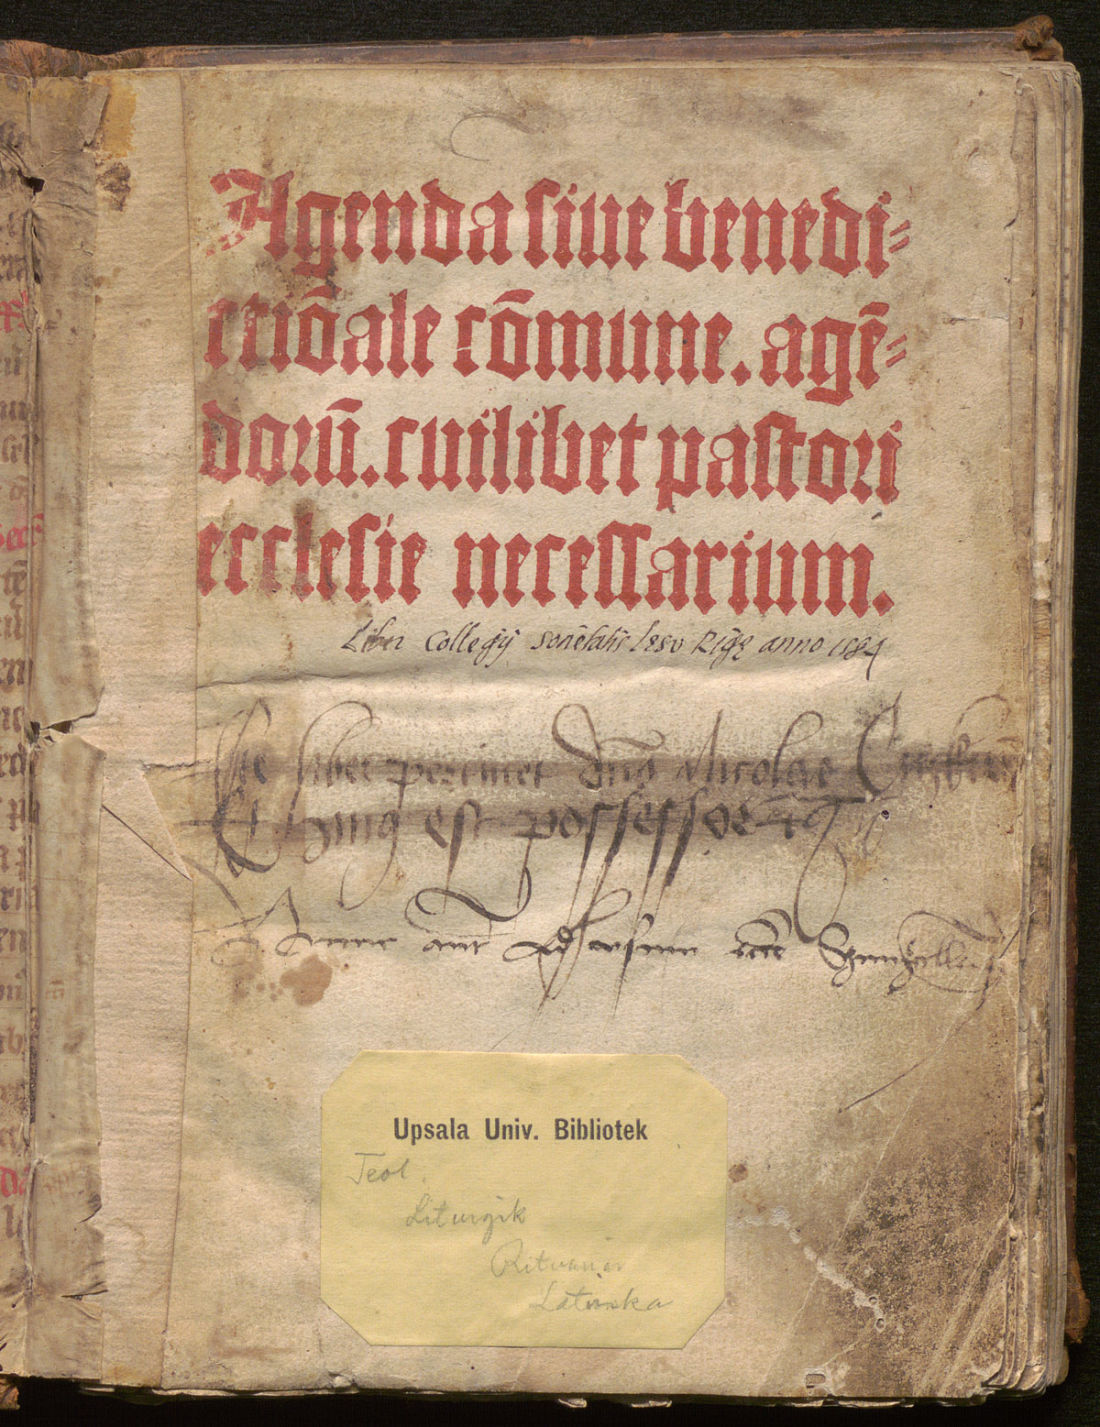 Title page of Agenda sive benedictionale commune. Under the Latin title in red there's handwritten text in Latvian